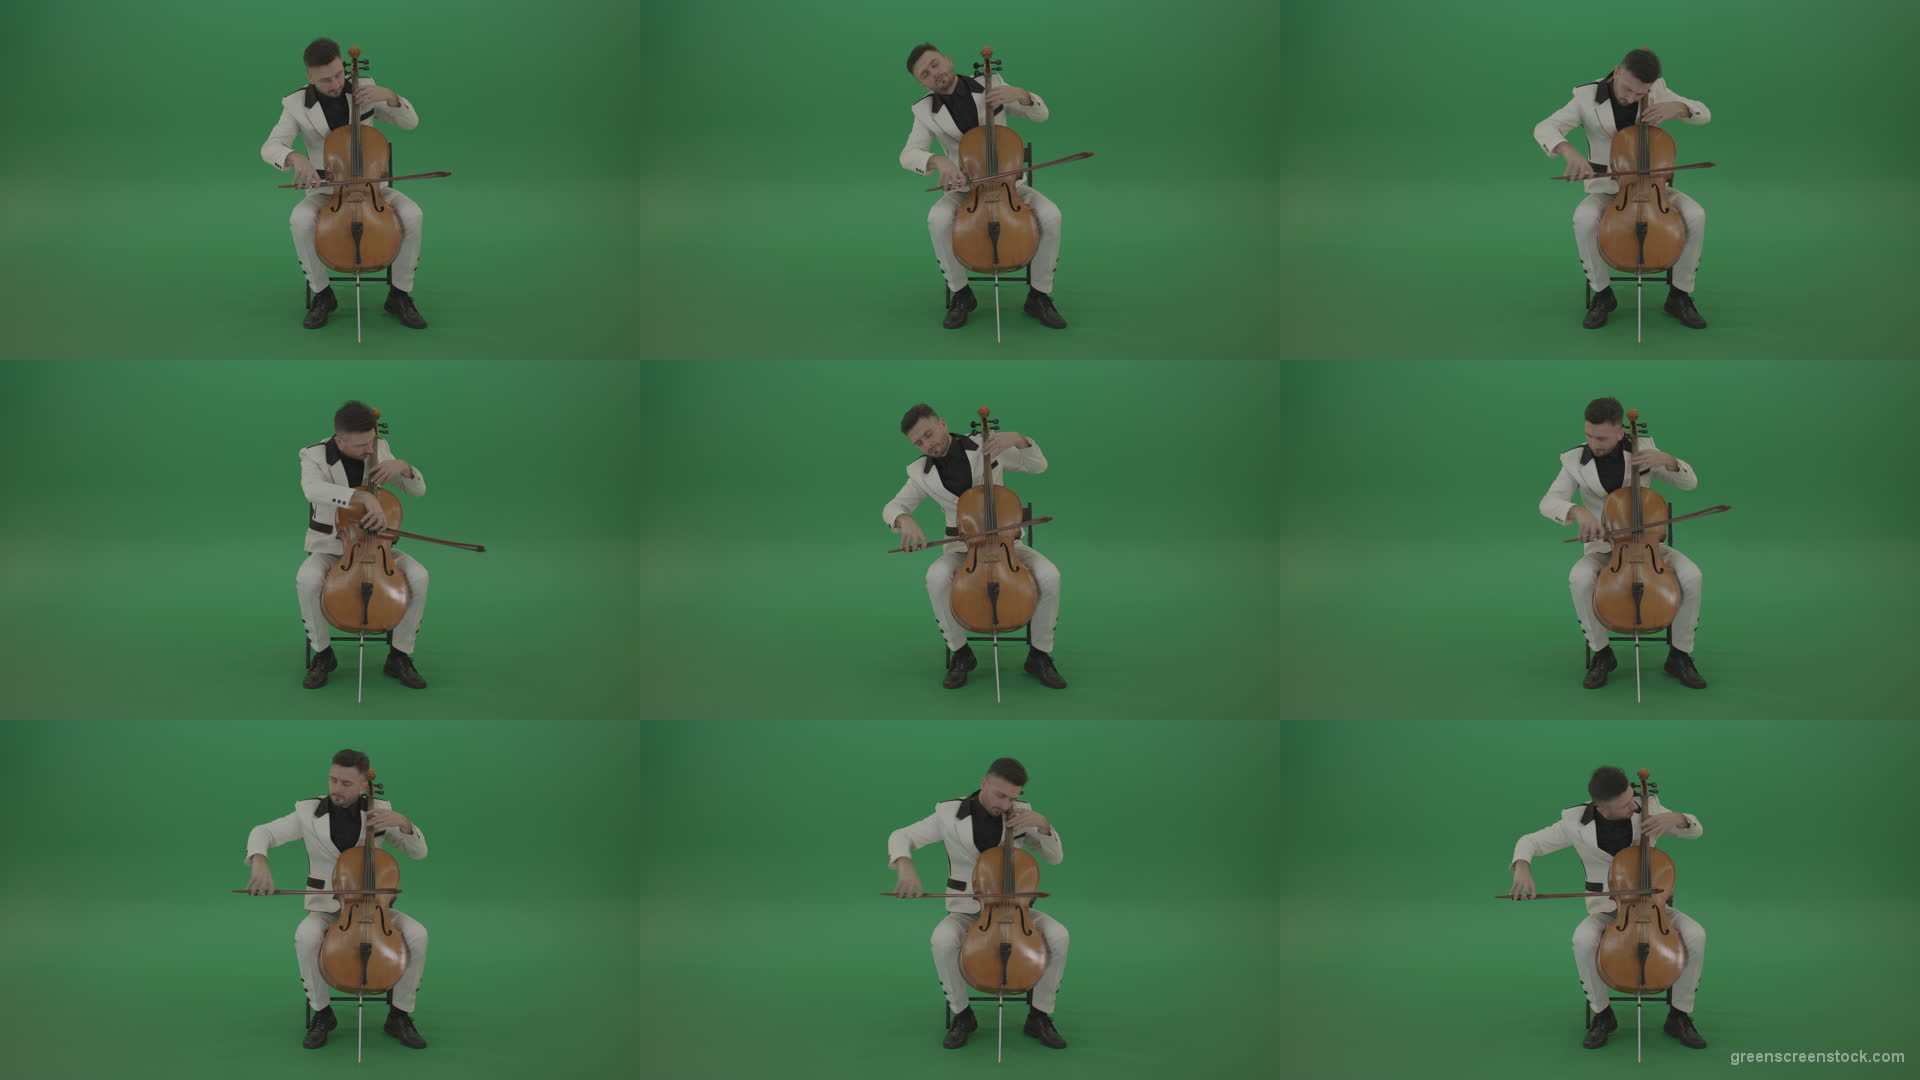 Classic-orchestra-man-in-white-wear-play-violoncello-cello-strings-music-instrument-isolated-on-green-screen Green Screen Stock